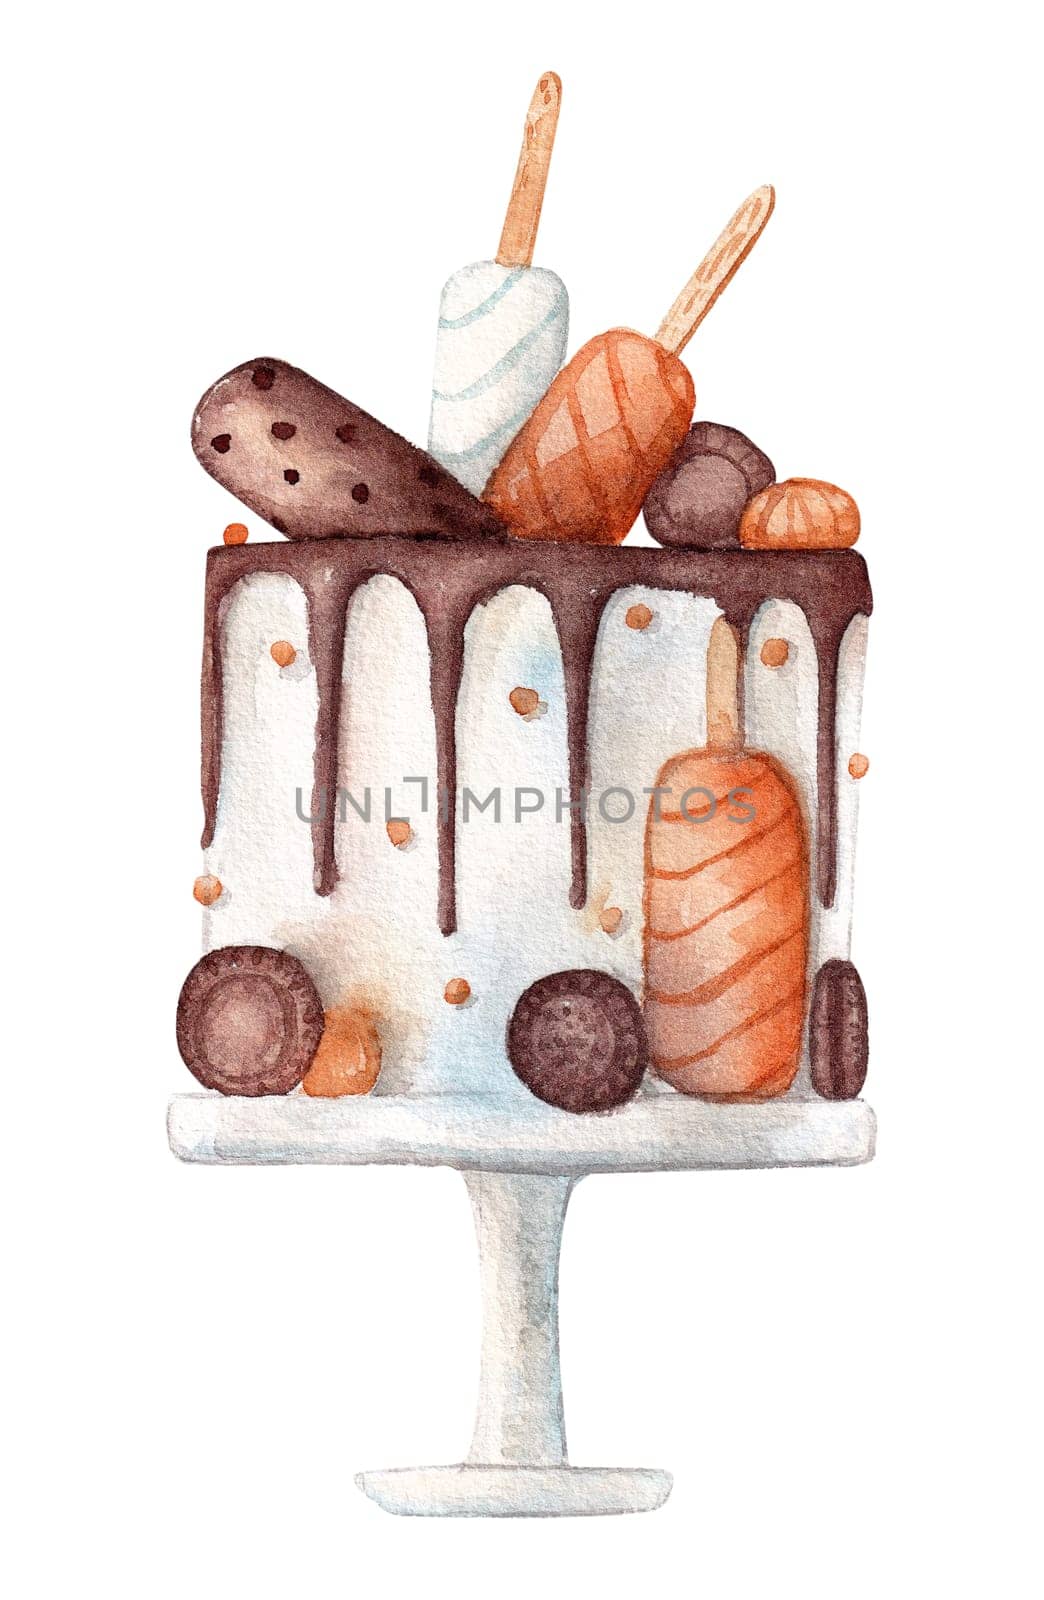 Tasty cake with cake pops decorations on white background, hand drawn watercolor illustration